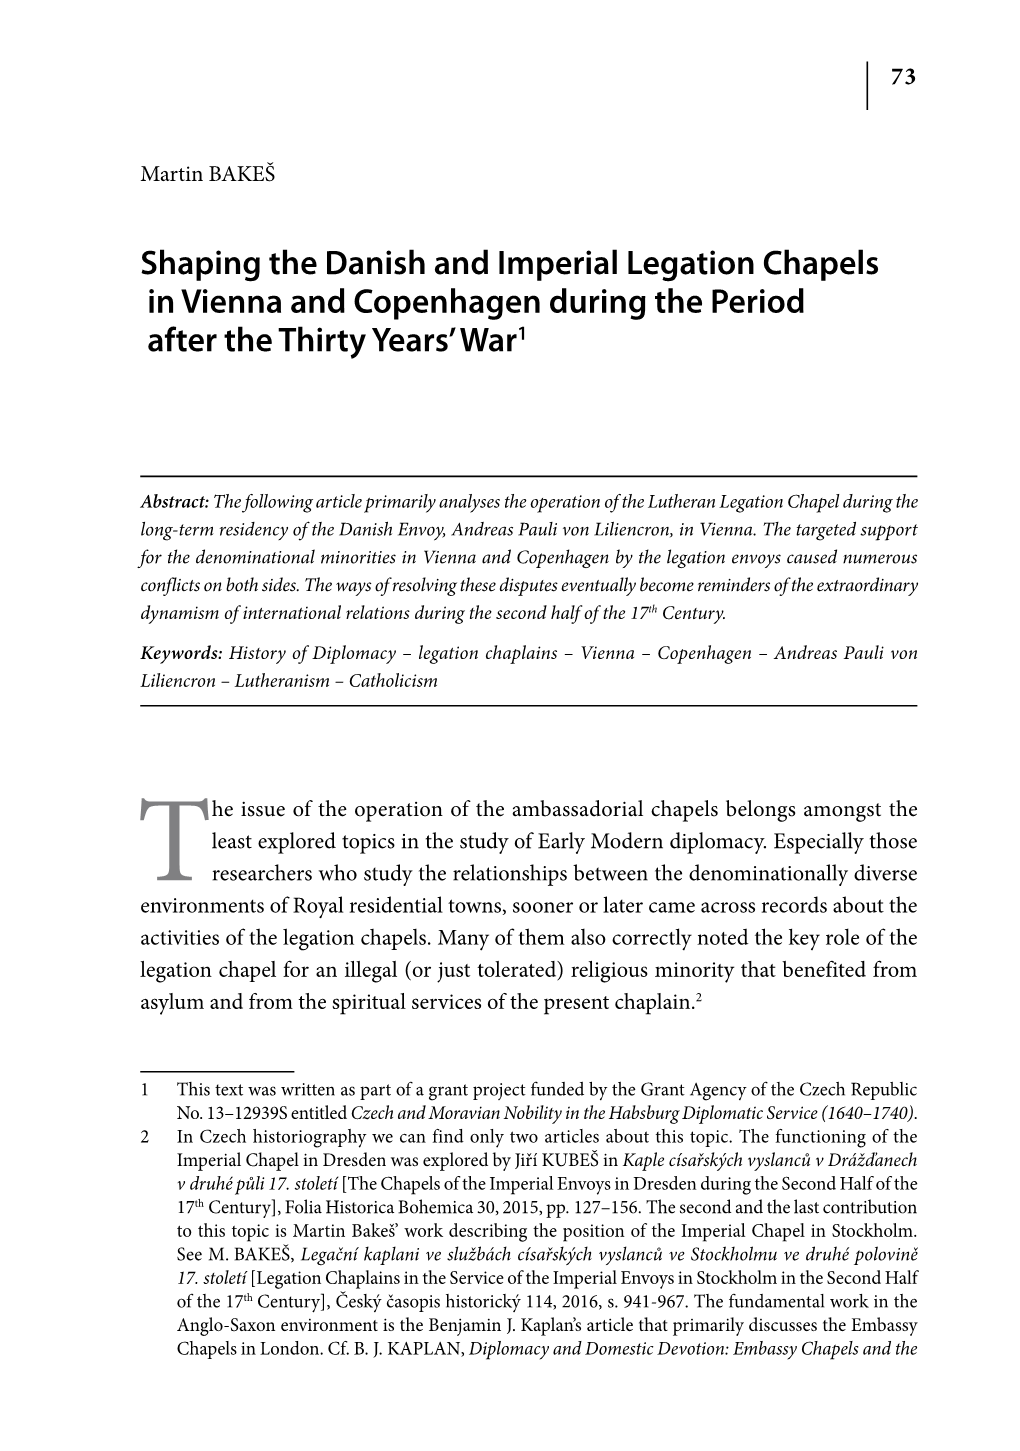 Shaping the Danish and Imperial Legation Chapels in Vienna and Copenhagen During the Period After the Thirty Years’ War1